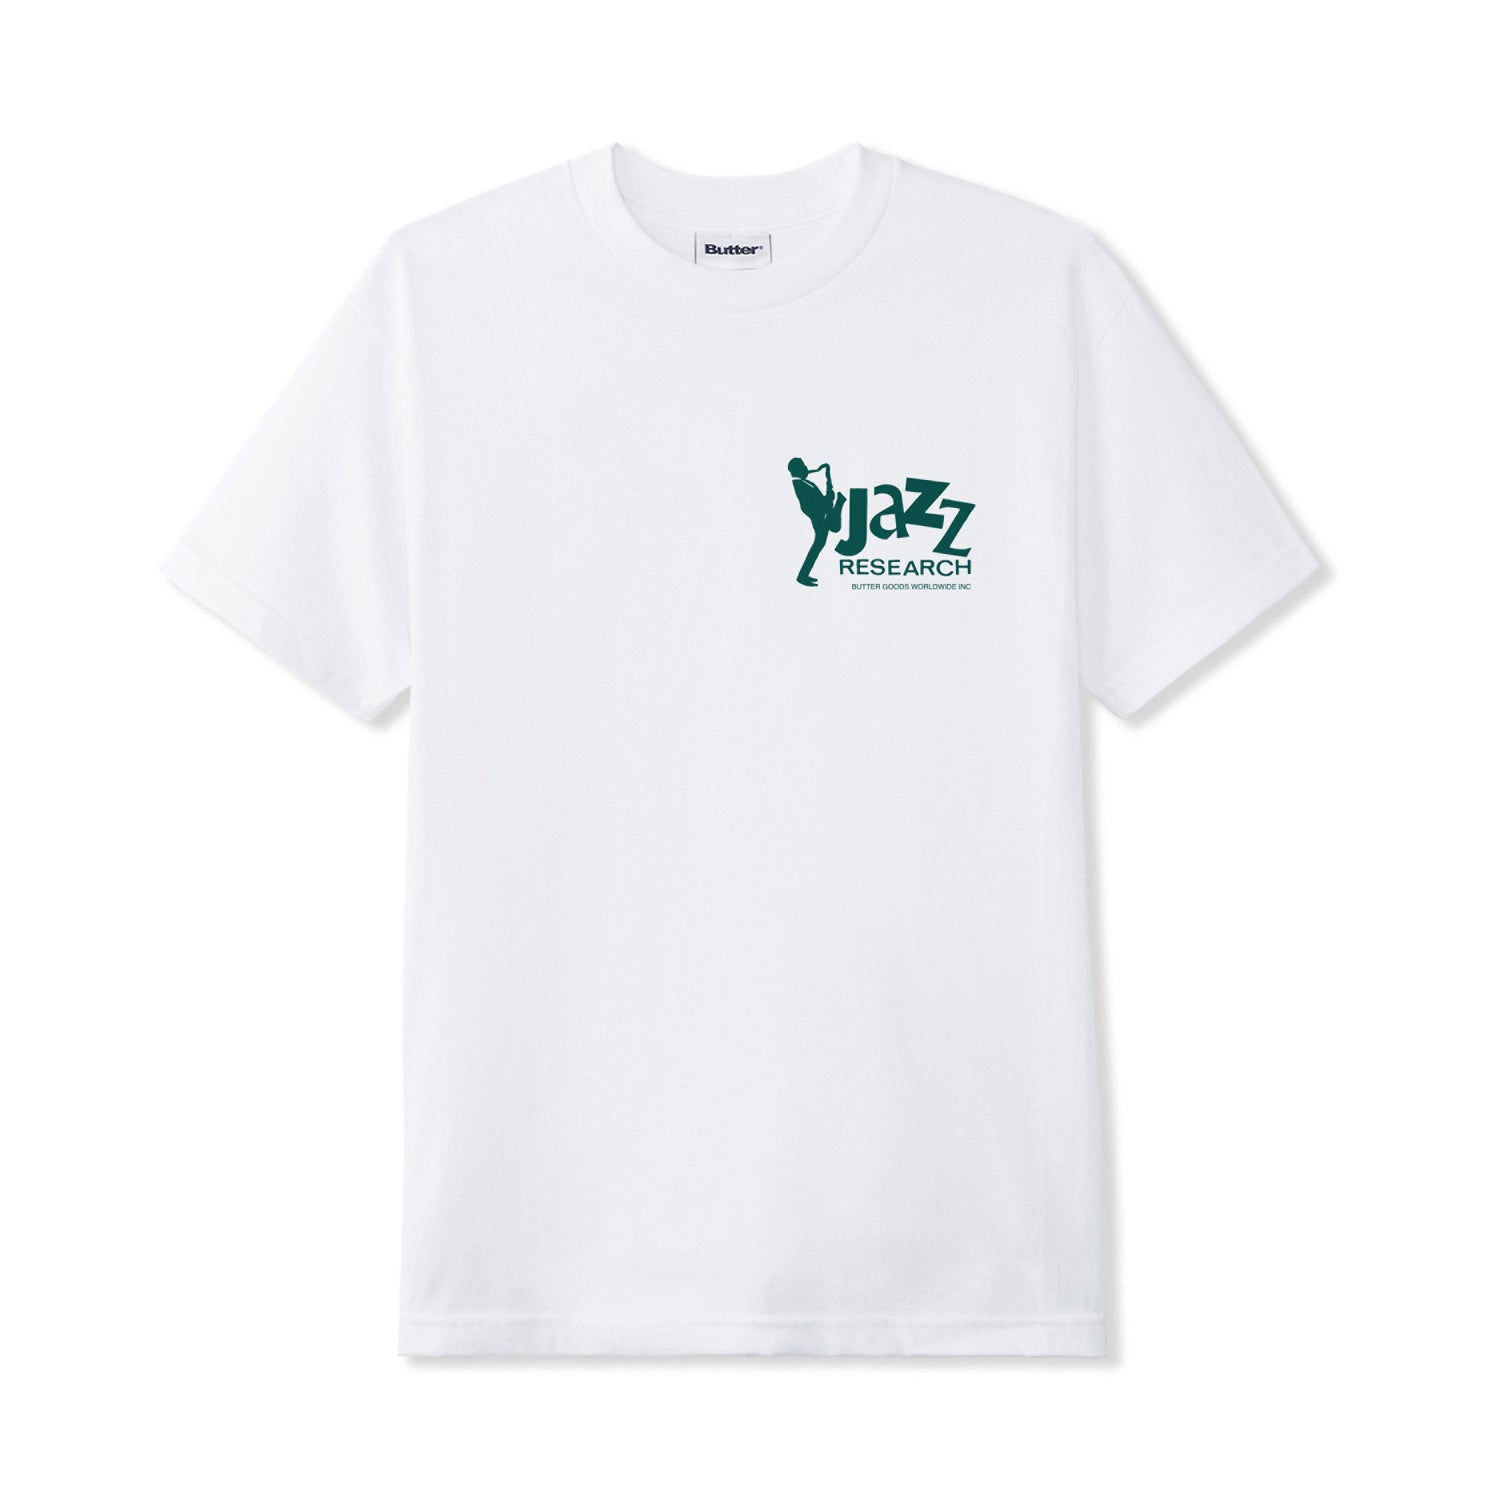 Jazz Research Tee, White